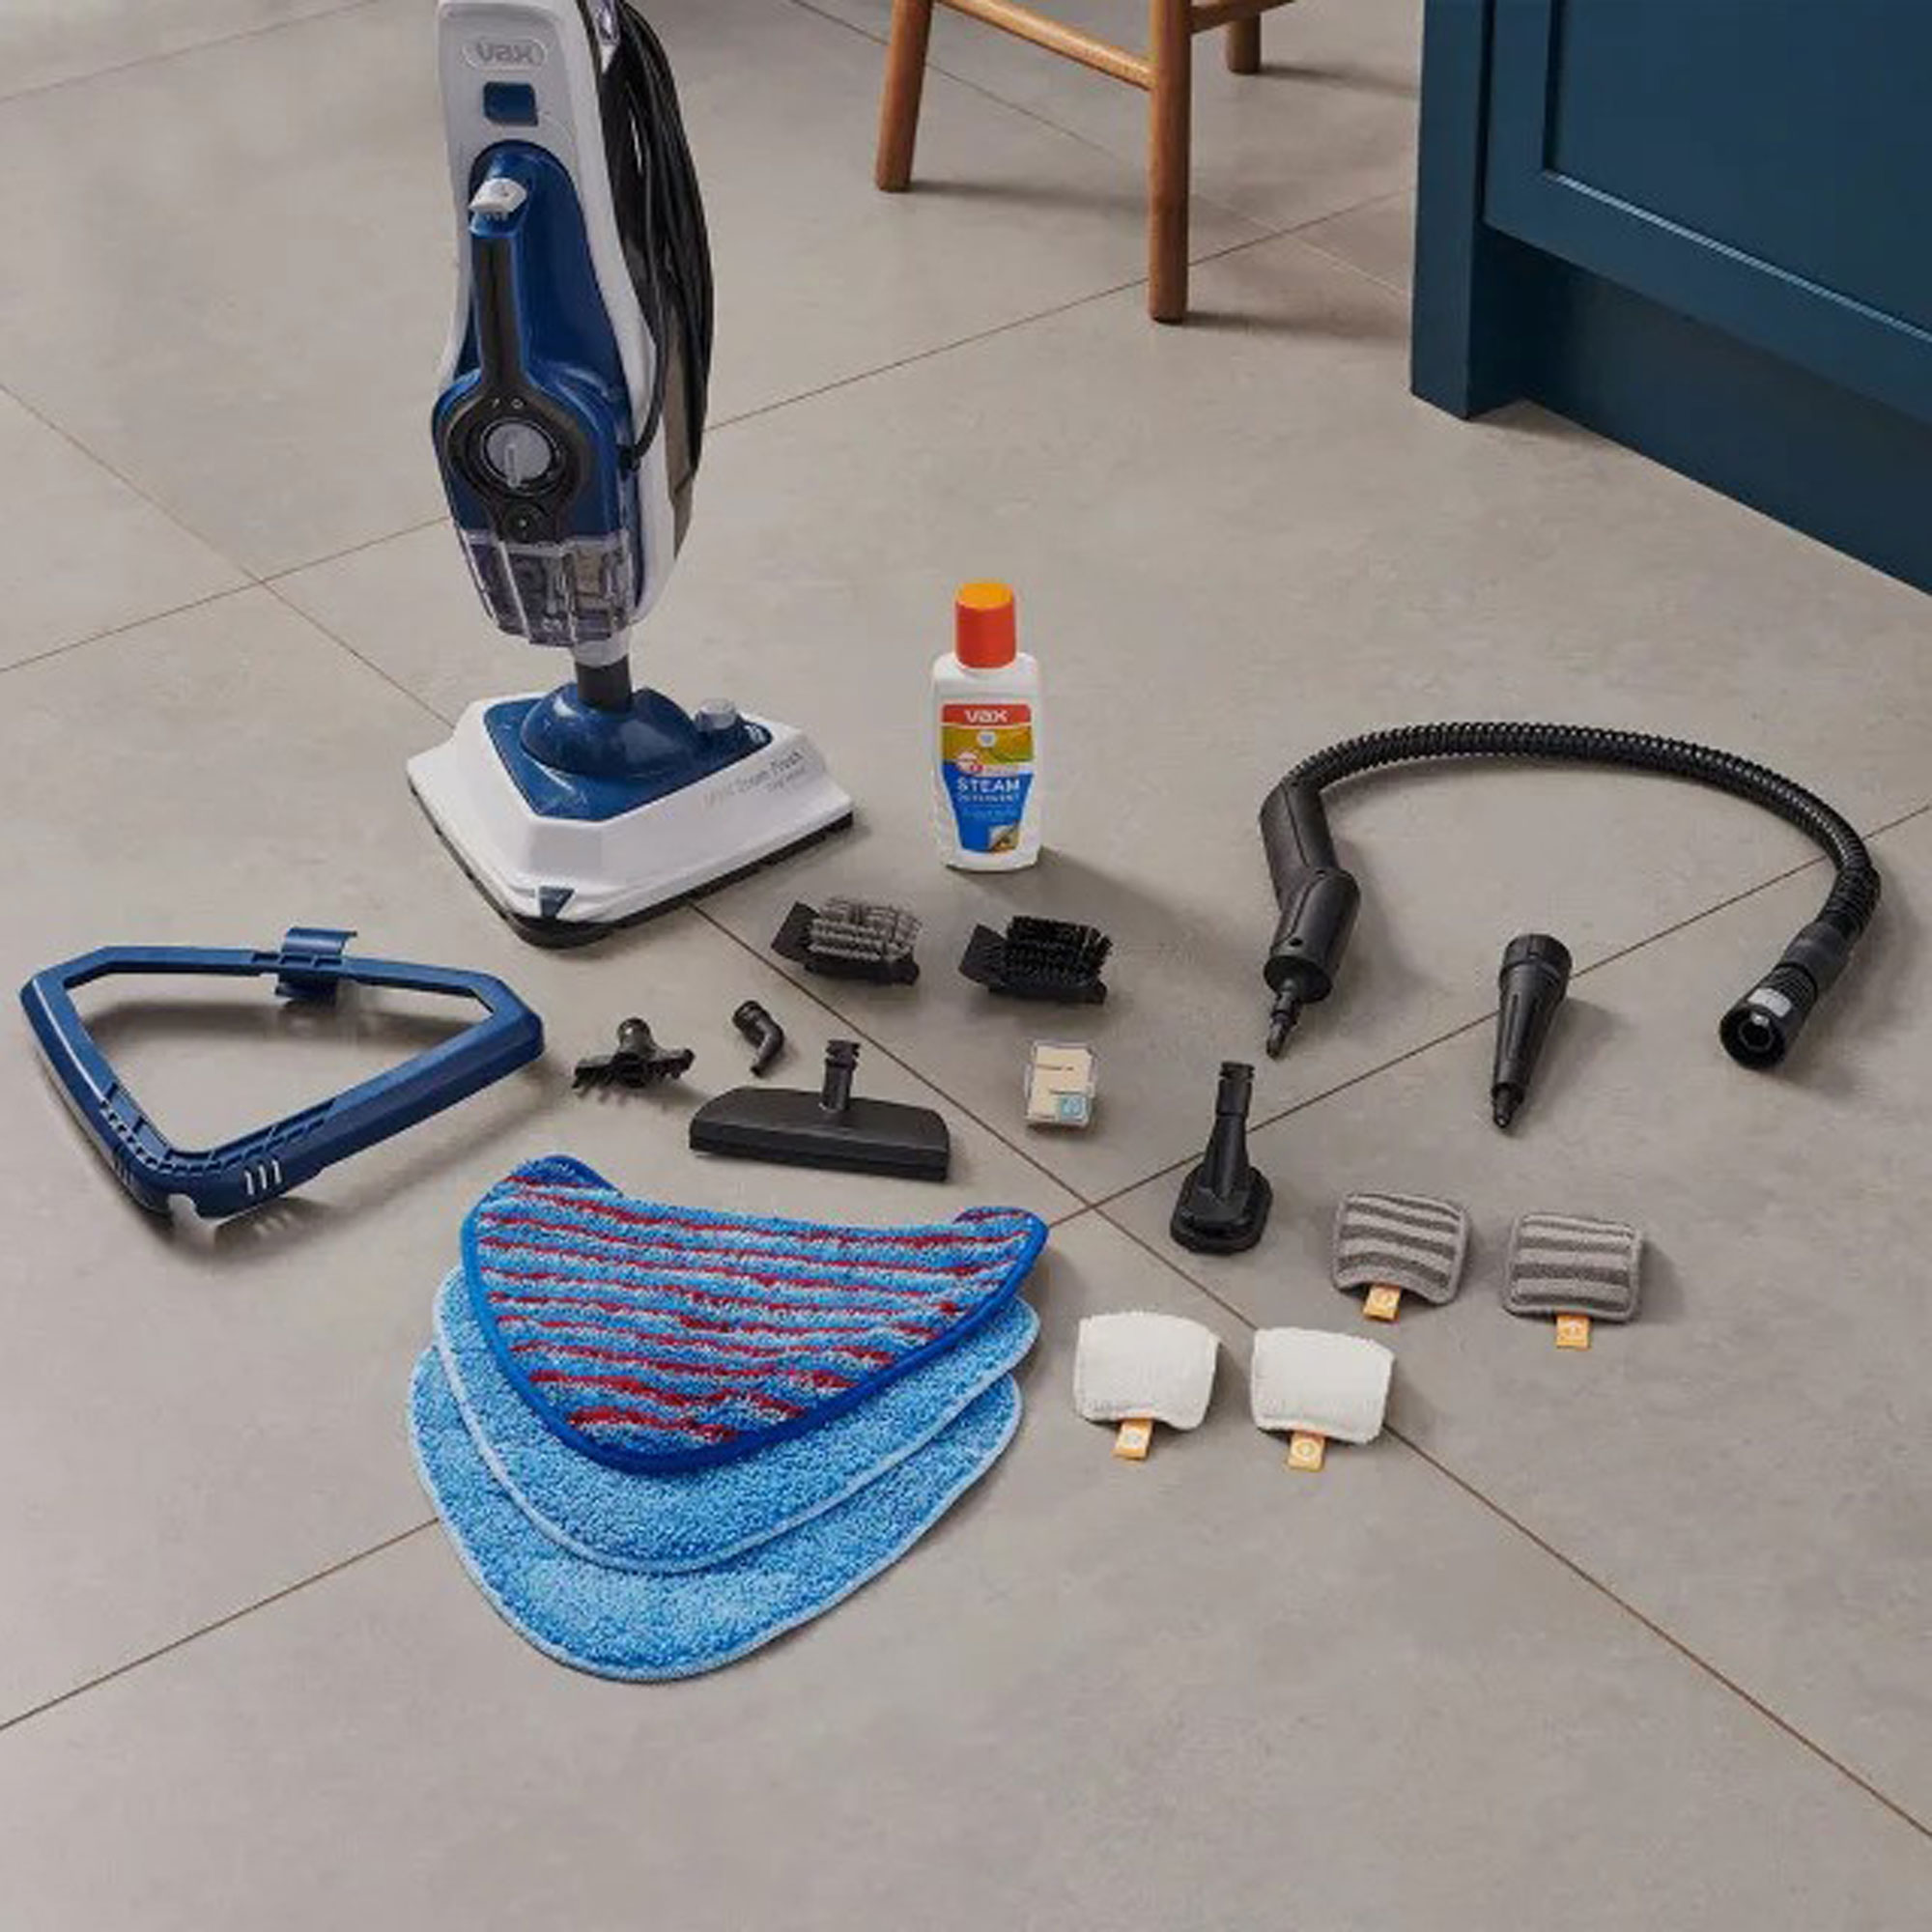 VAX steam fresh total home steam cleaner parts on a floor